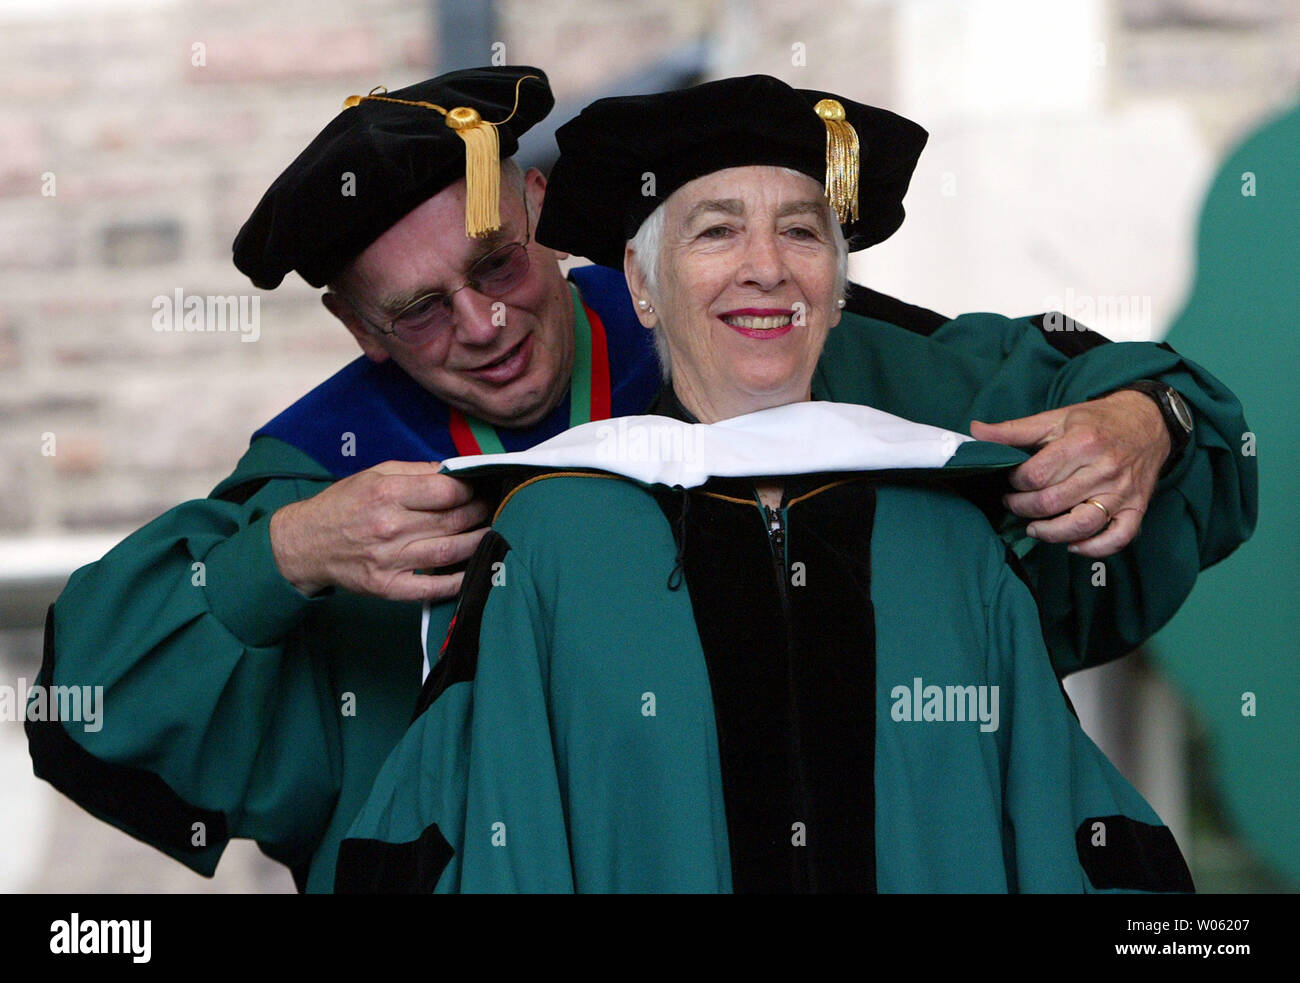 Pulitzer Foundation Chairman Emily Rauh Pulitzer is hooded by Edward Wilson (L) commencement grand marshall during the Washington University graduation ceremonies in St. Louis on May 20, 2005. Pulitzer was presented with the Honorary Degree of Doctor of Humanities. Pulitzer is also an internationally respected curator, collector and patron of the visual arts.  (UPI Photo/Bill Greenblatt) Stock Photo